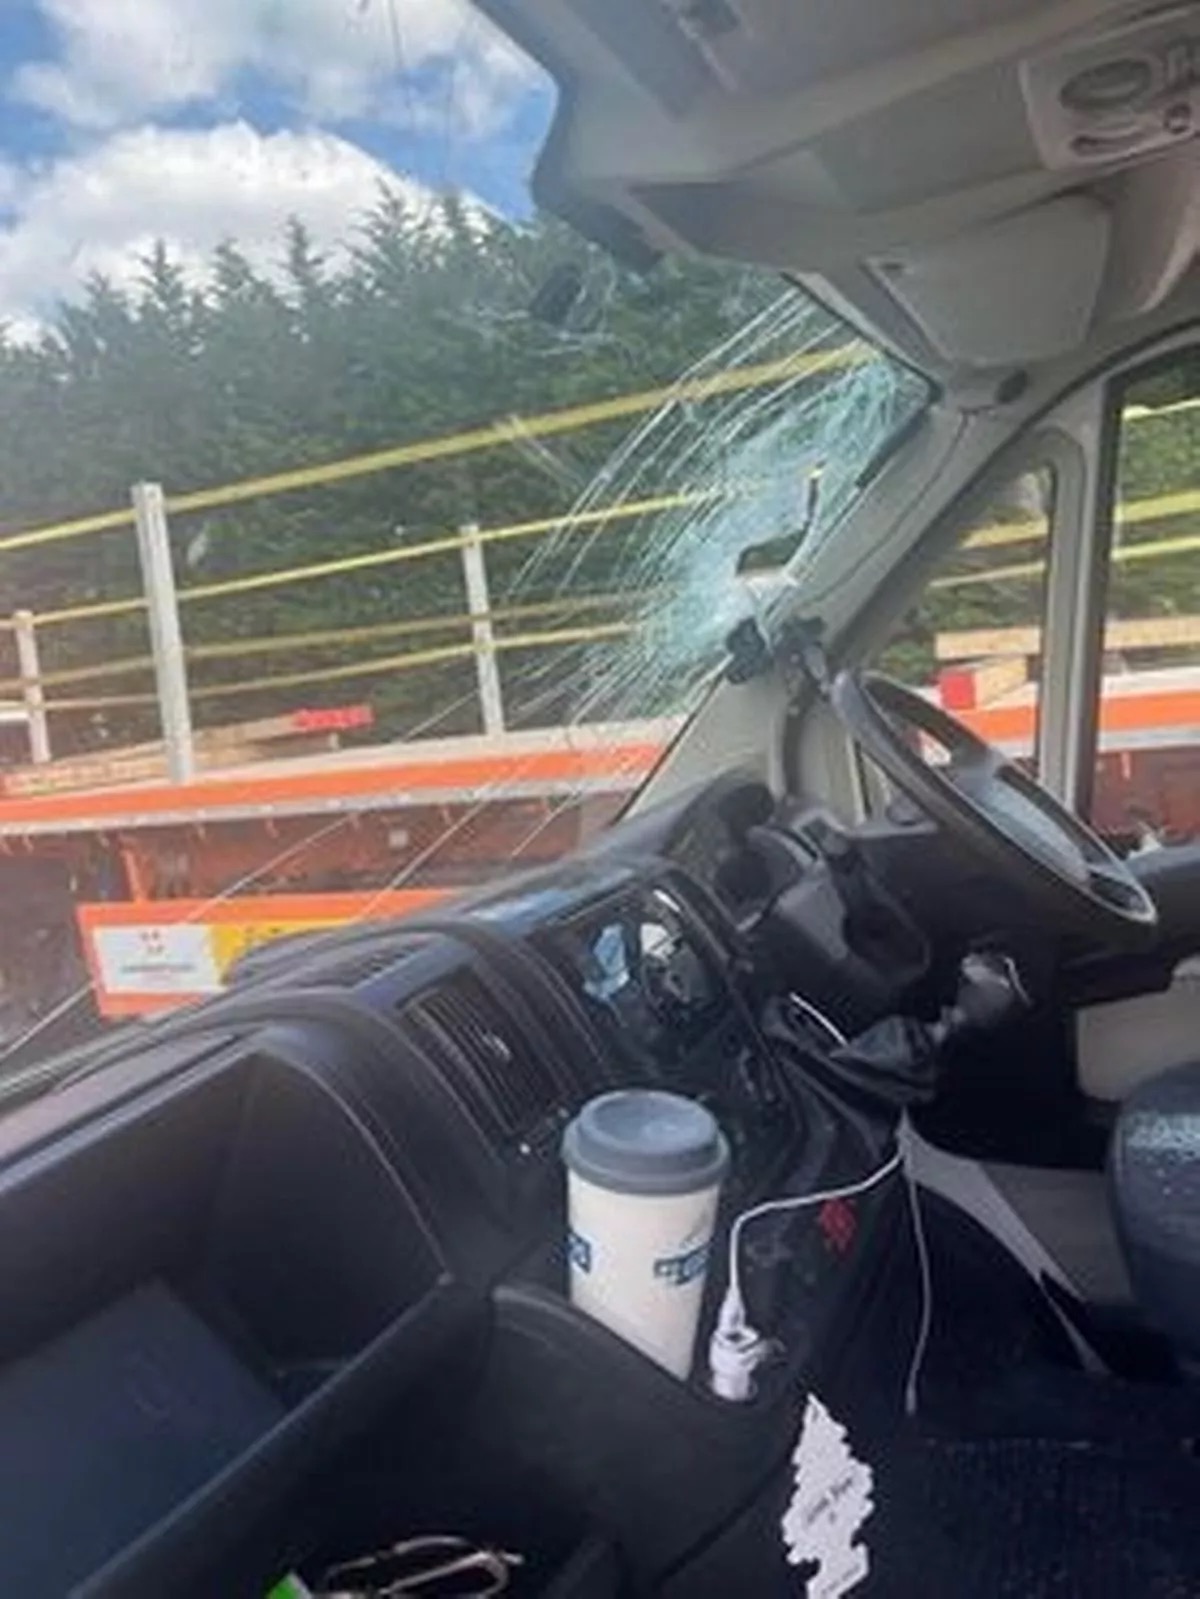 It had flown through the windscreen while the pair were driving home from Devon